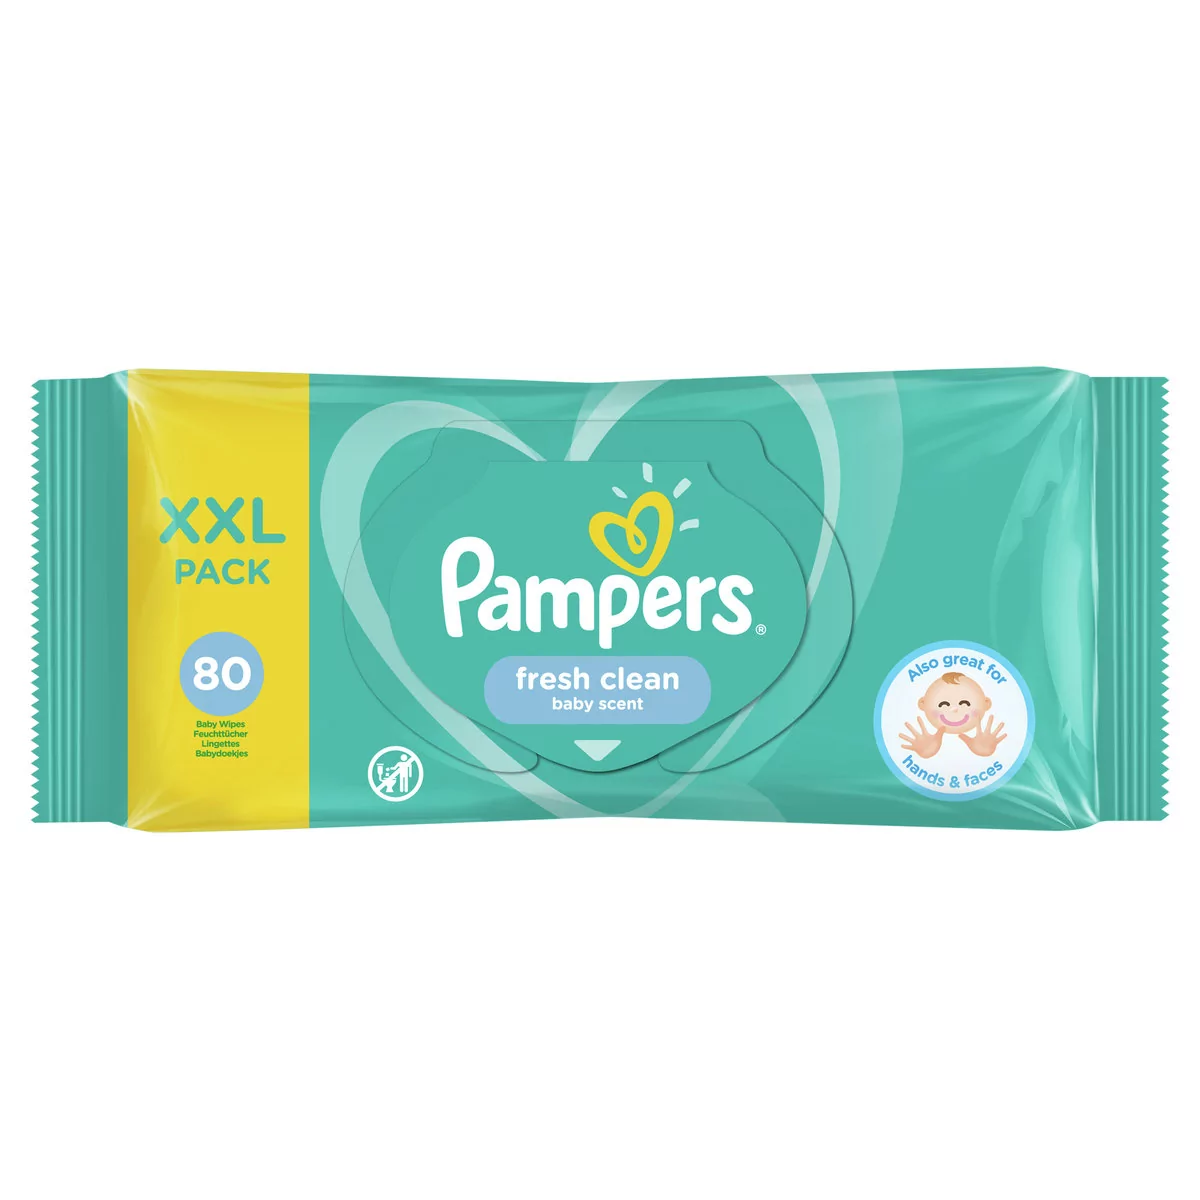 pampers giga pack 3